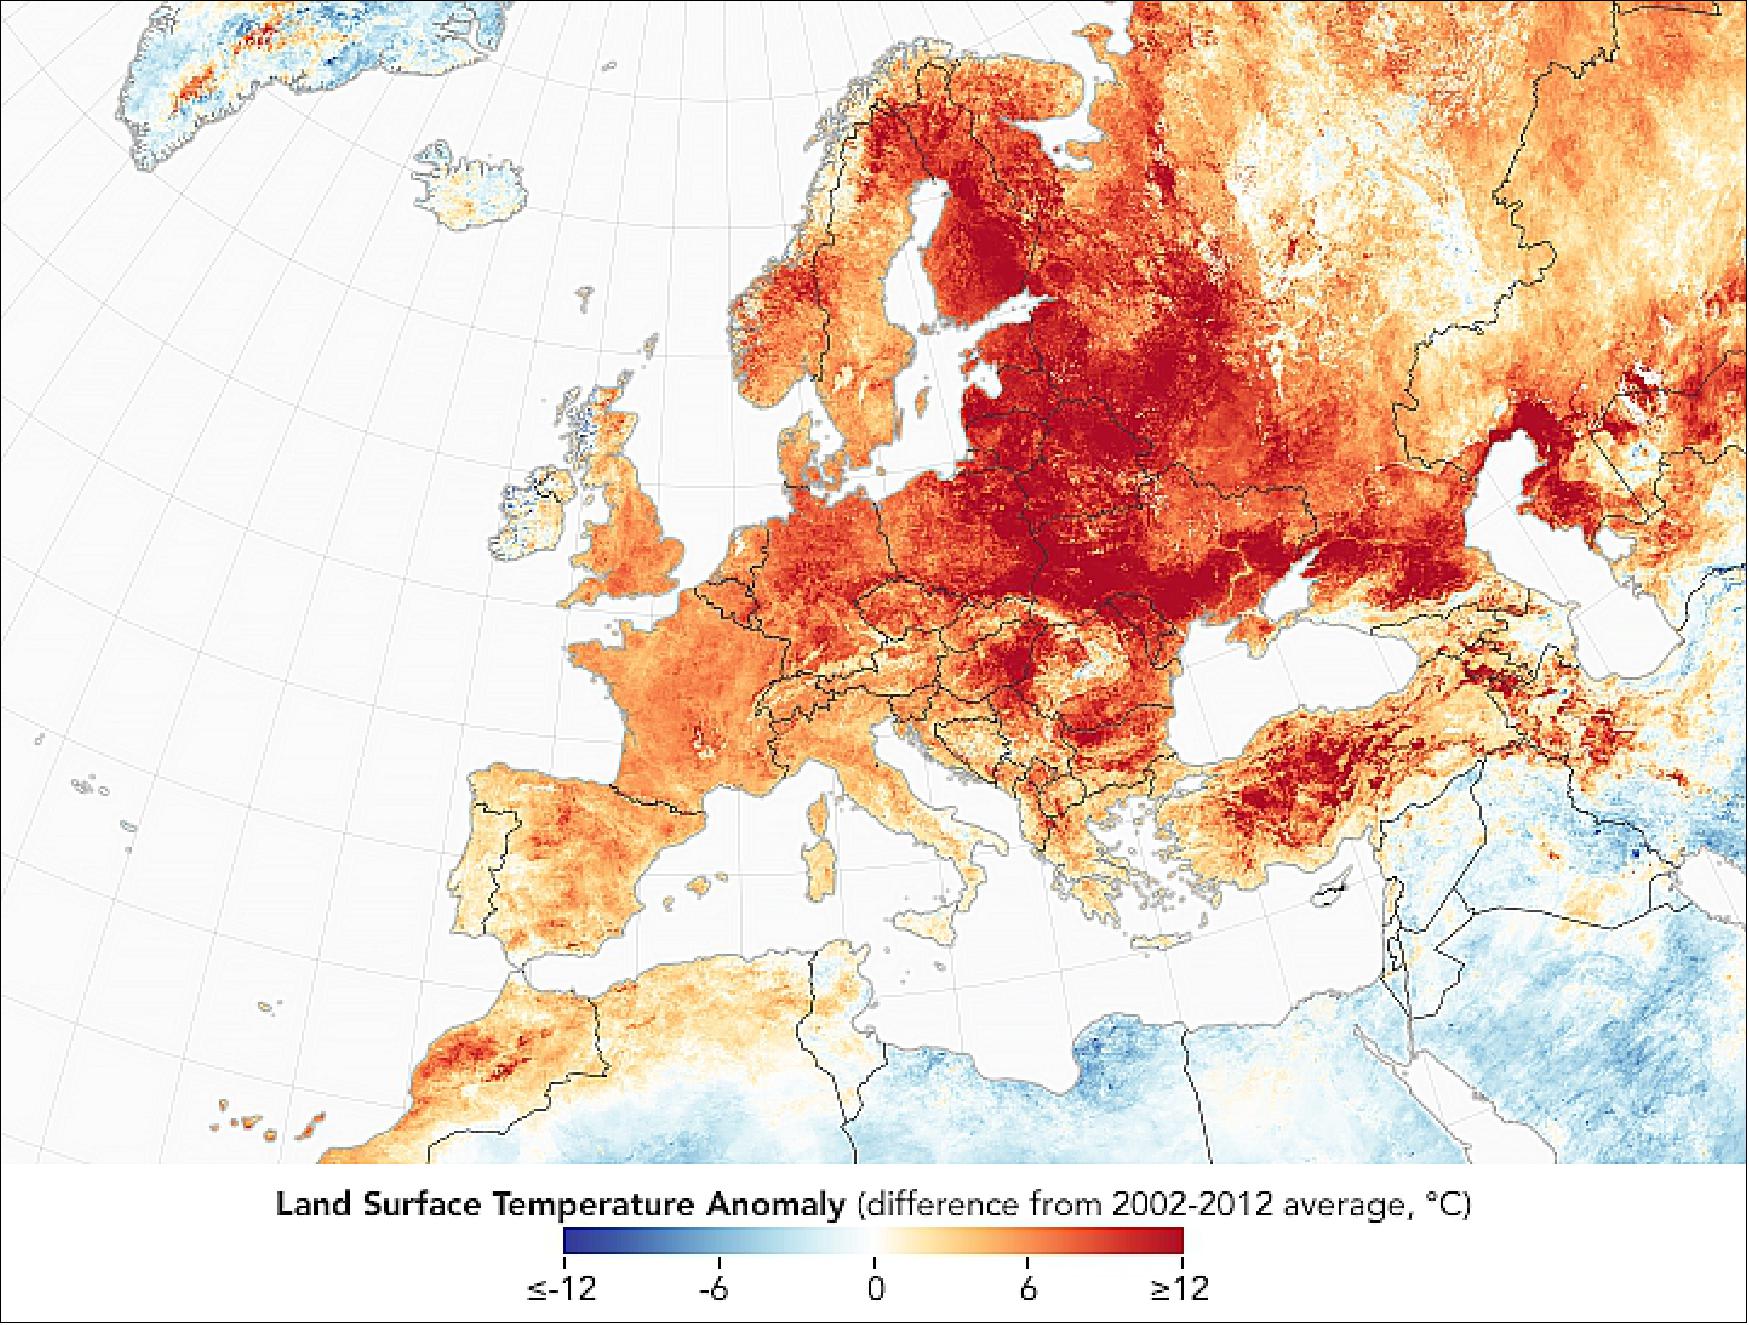 Figure 47: While the UK was experiencing record-breaking warmth, increased temperatures spread across central and eastern Europe—so much that spring barley harvesting may start early. Forecasters say the weather over central Europe will be warmer and drier-than-normal through May (image credit: NASA Earth Observatory, image by Joshua Stevens, using data from the Level 1 and Atmospheres Active Distribution System (LAADS) and Land Atmosphere Near real-time Capability for EOS (LANCE), story by Kasha Patel)